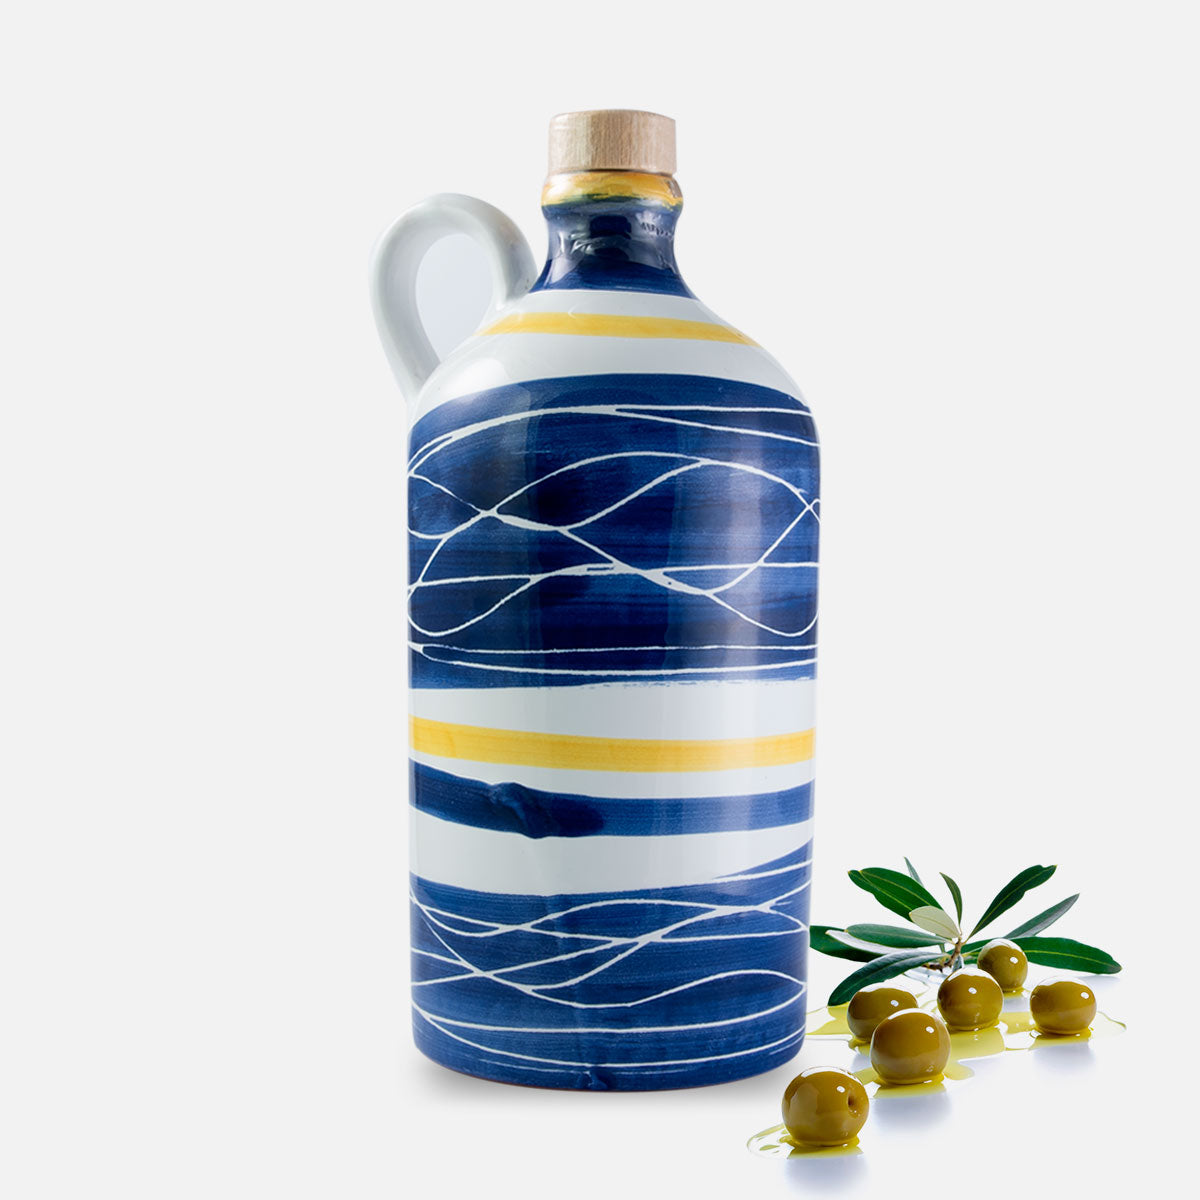 Sorrento Navy Blue Dolceterra Olive Oil Handmade Painted: Hand-Painted Olive Oil Elegance from Sorrento